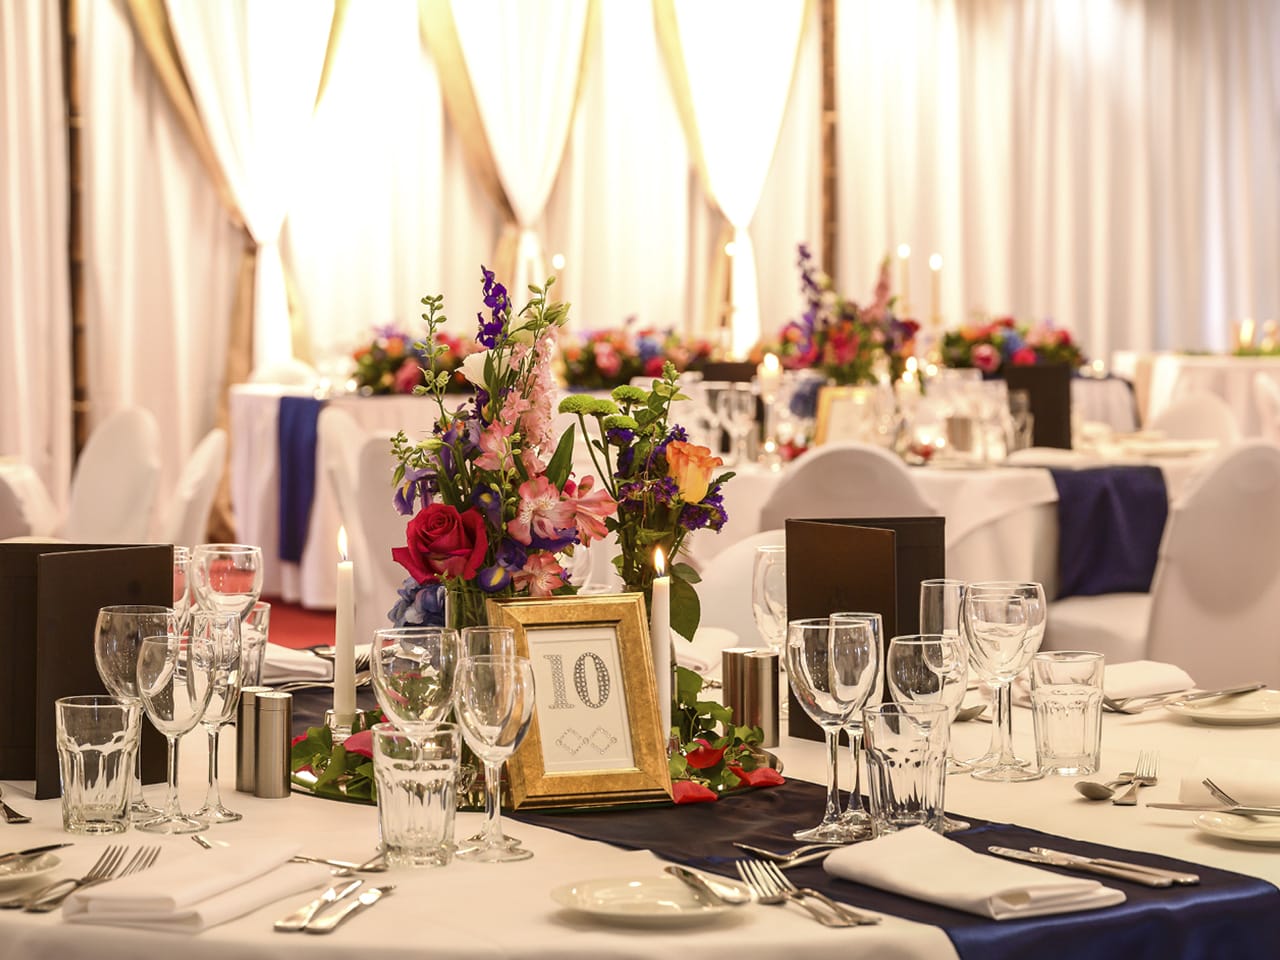 Flower Centerpieces With Table Number, Wine Glasses, Table Napkins, Spoon And Forks And Stage Behind